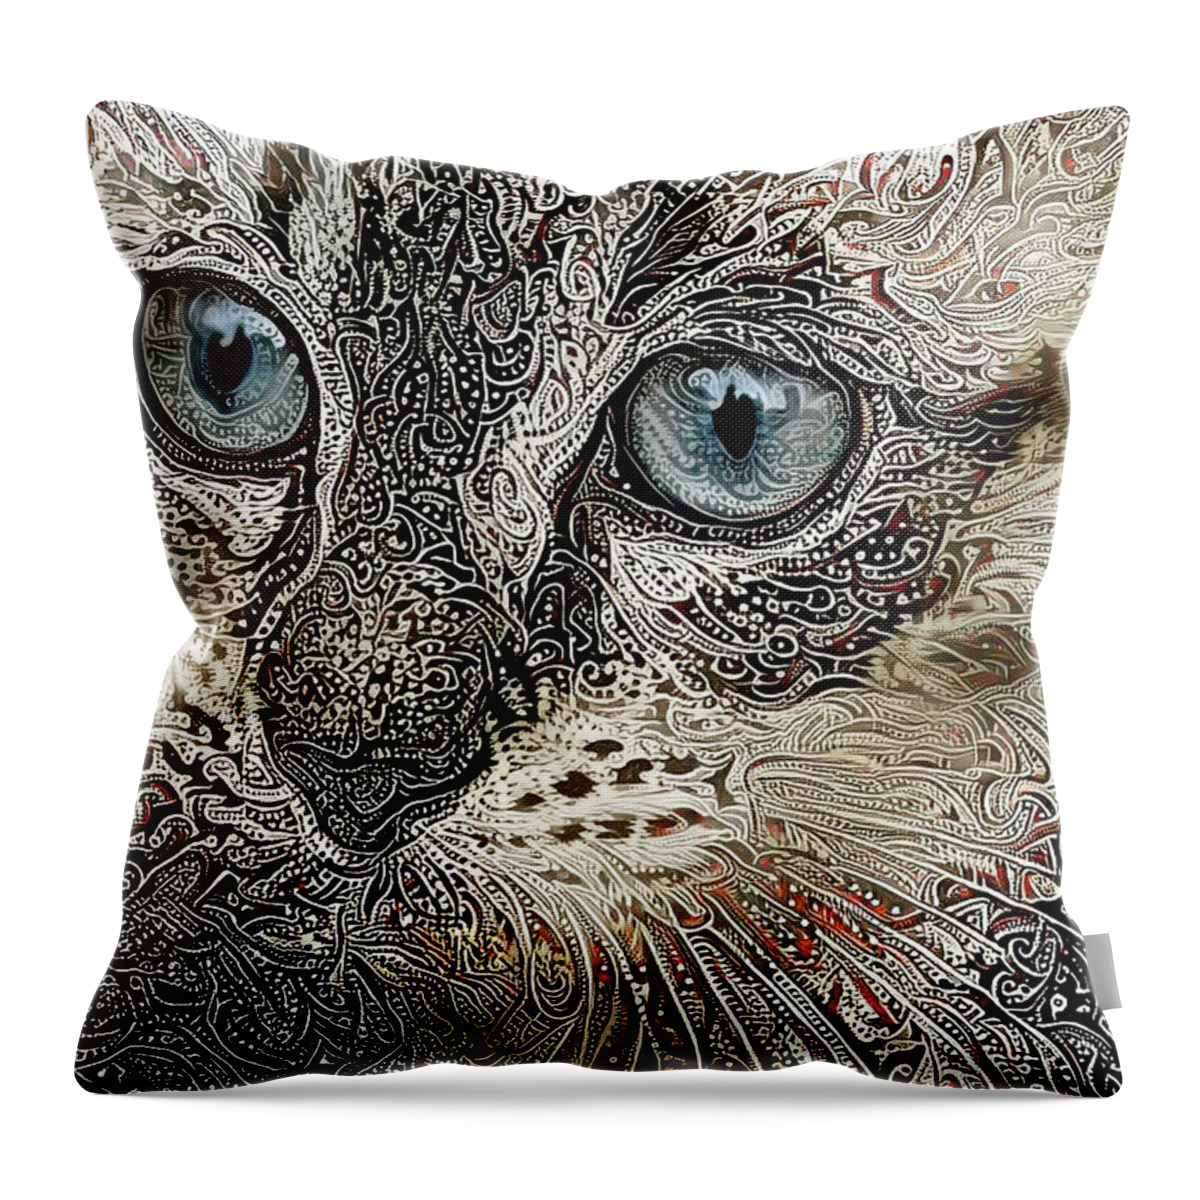 Siamese Cat Throw Pillow featuring the digital art Gypsy the Siamese Kitten by Peggy Collins